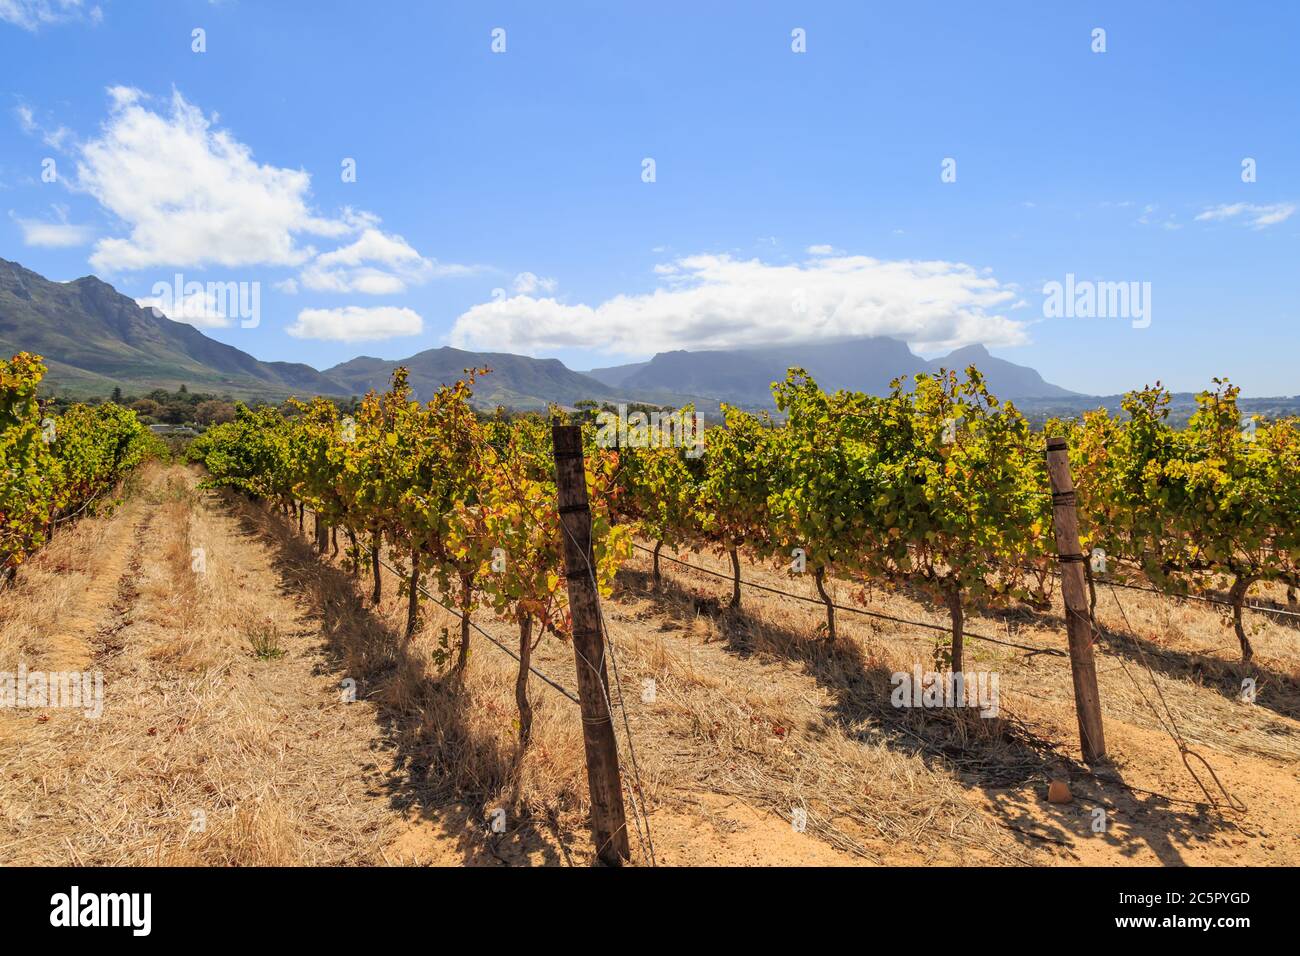 A vineyard in Cape Town, with Table Mountain behind Stock Photo